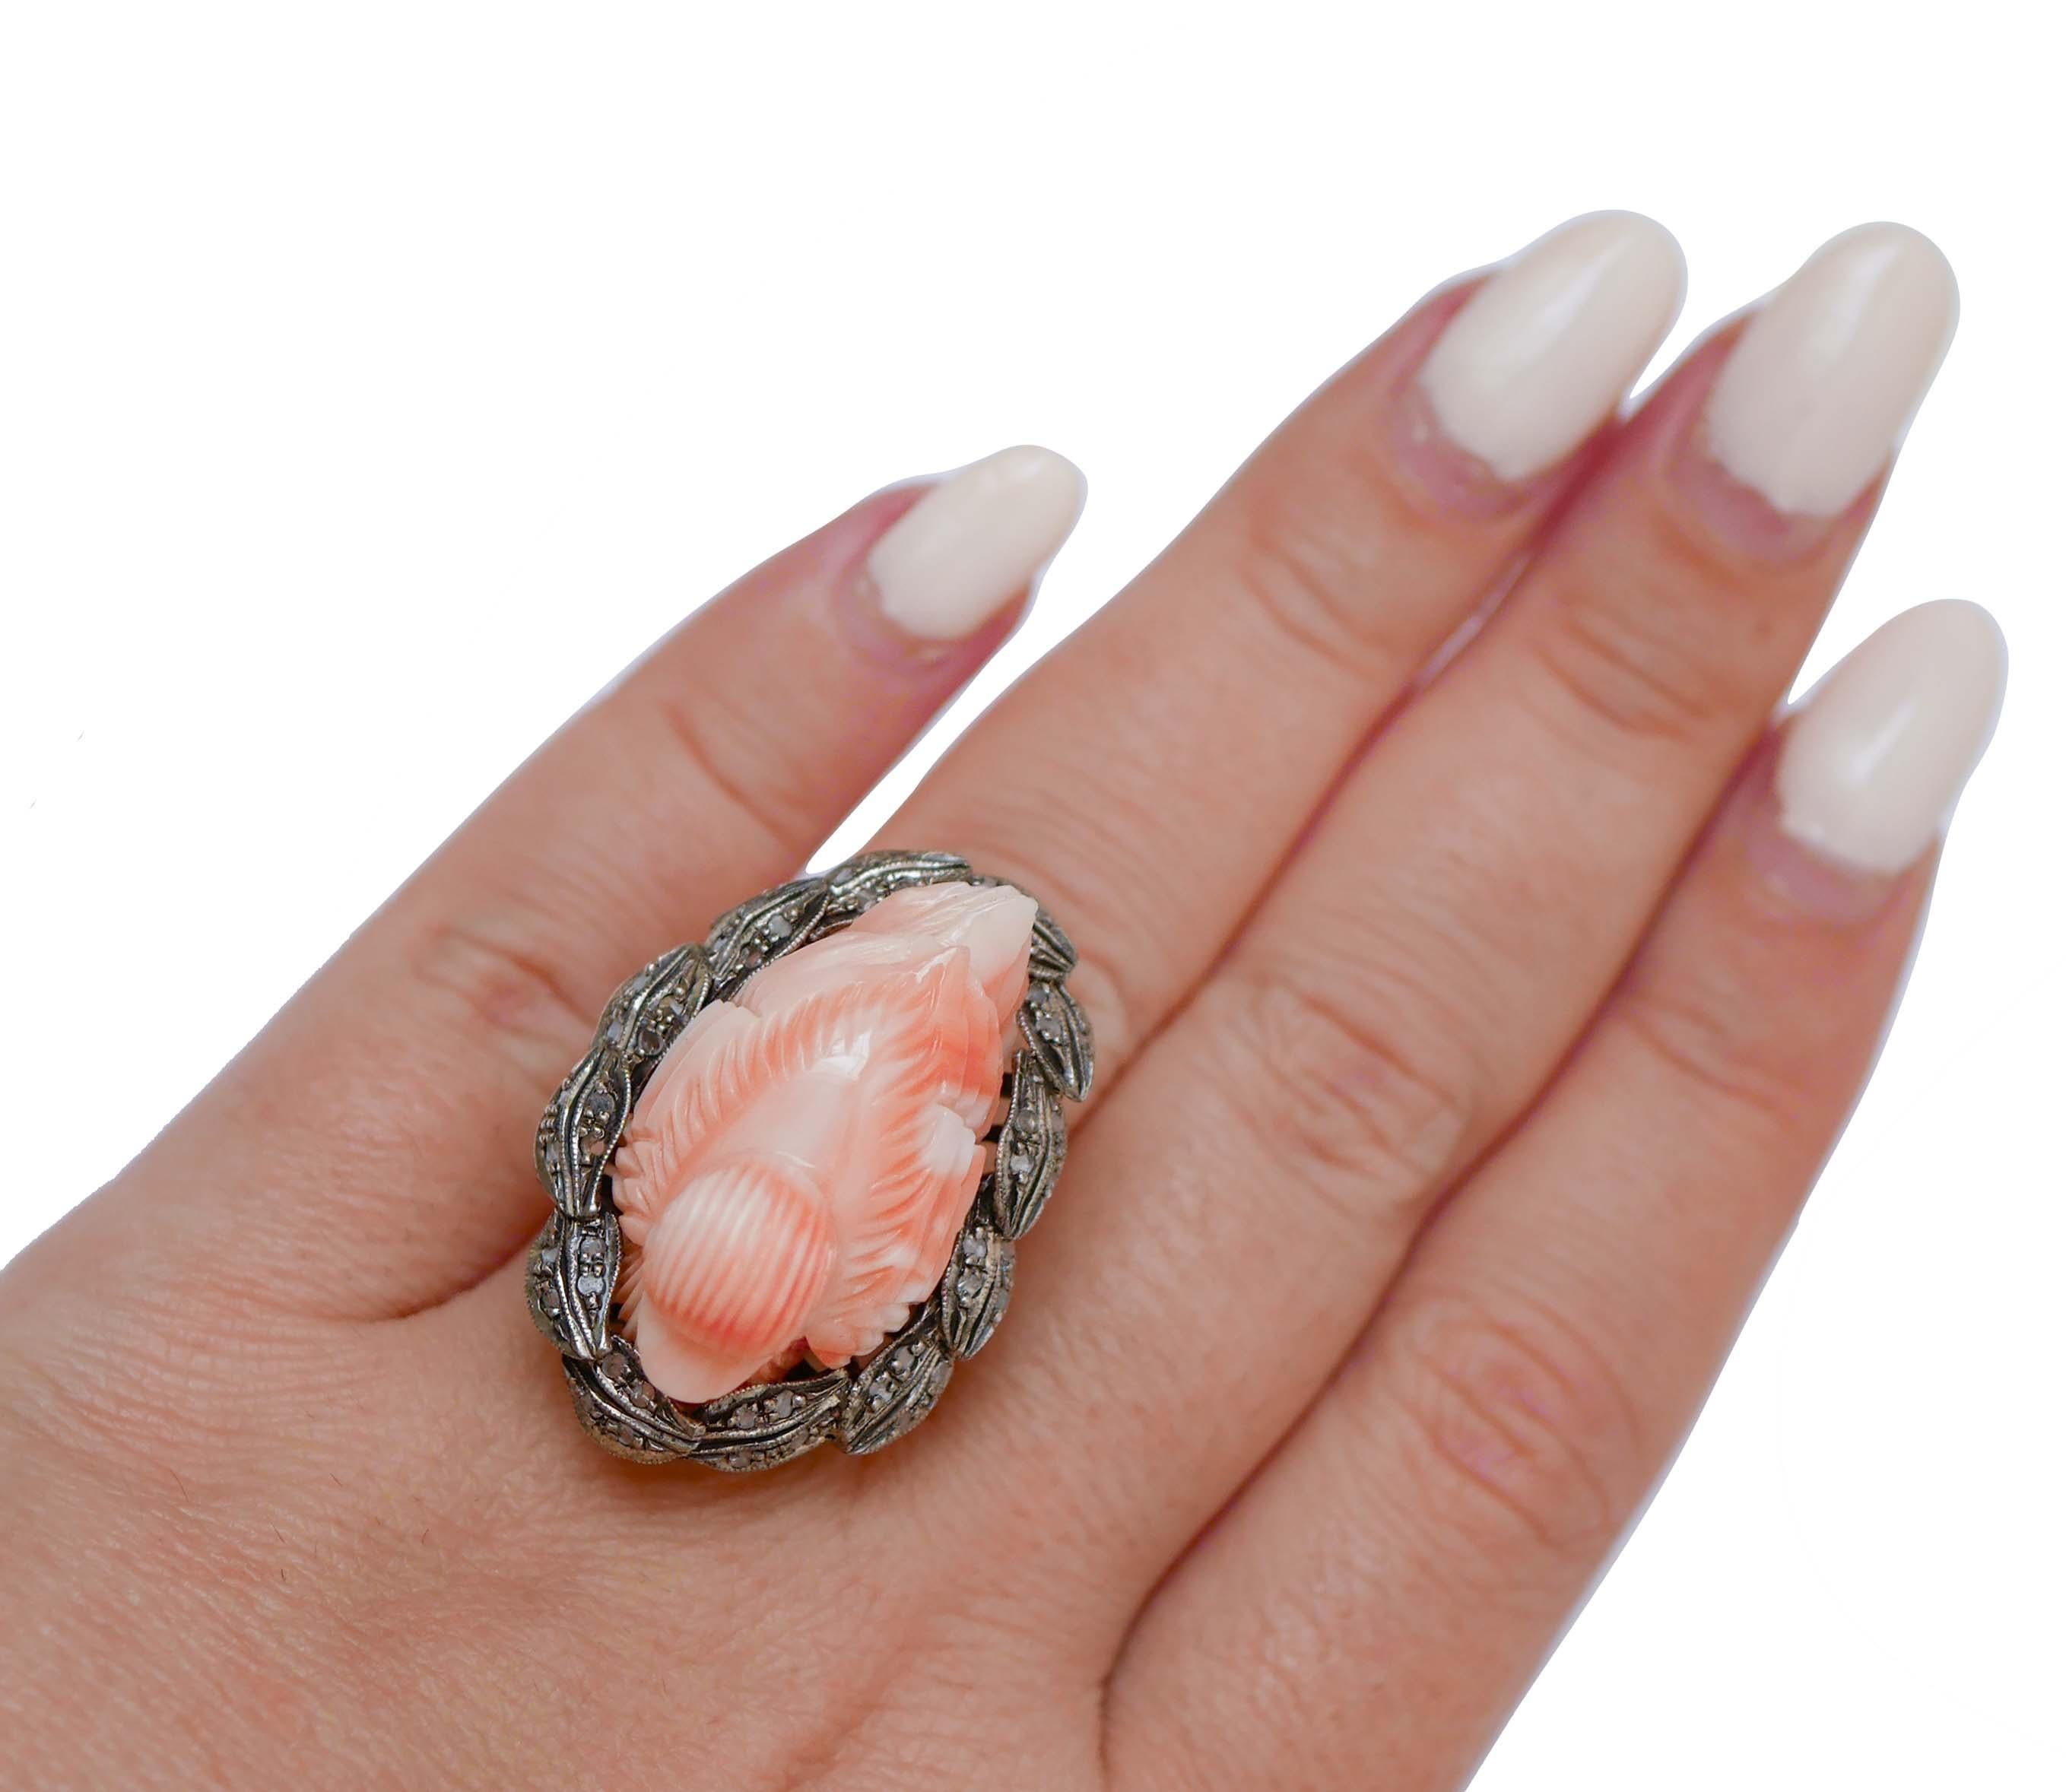 Mixed Cut Coral, Diamonds, Rose Gold and Silver Retrò Ring.